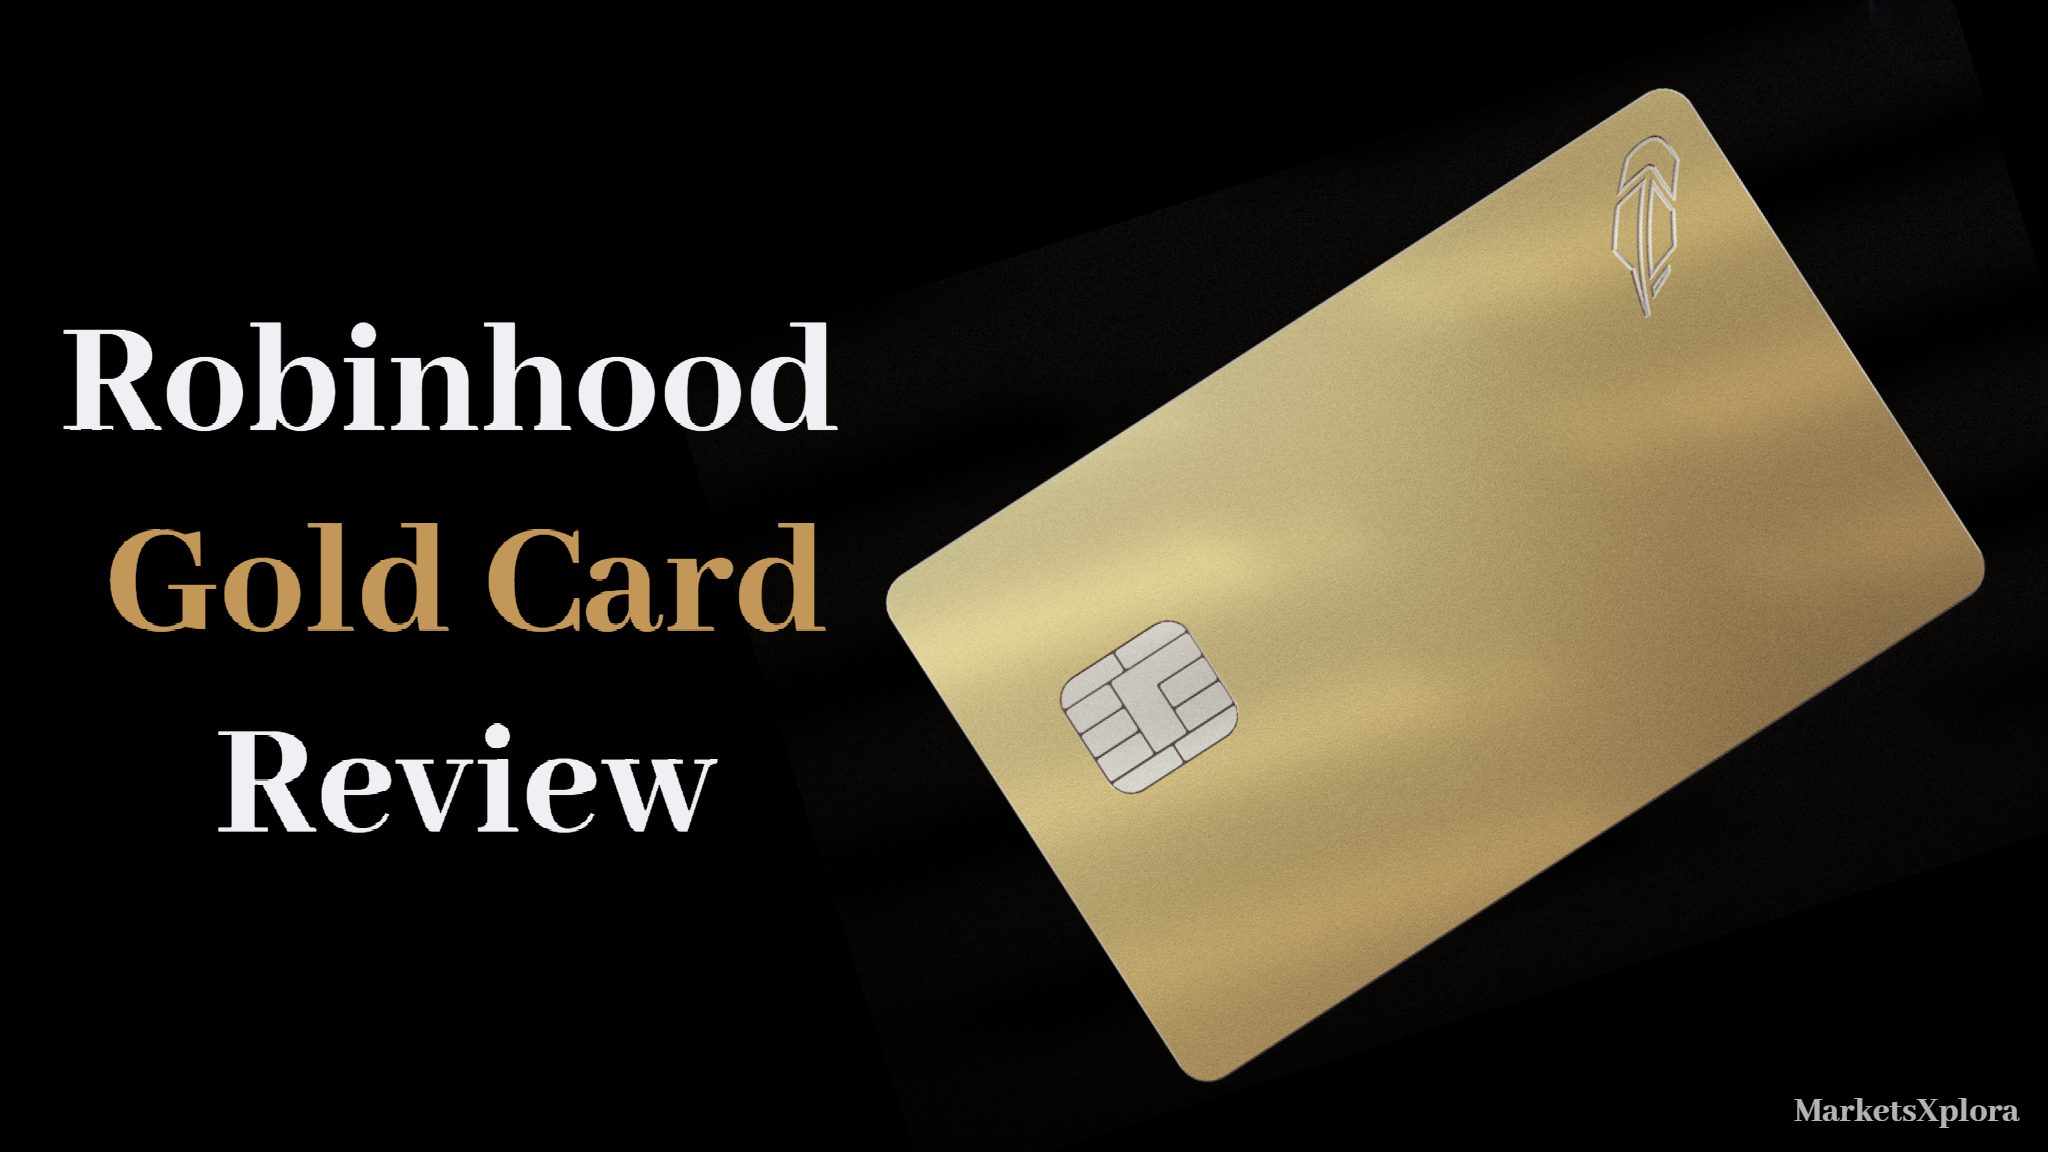 The Robinhood Gold Card Review explores the innovative cash back credit card for Robinhood Gold members, offering 3% back, no annual fee, and unique features like virtual cards and family controls.